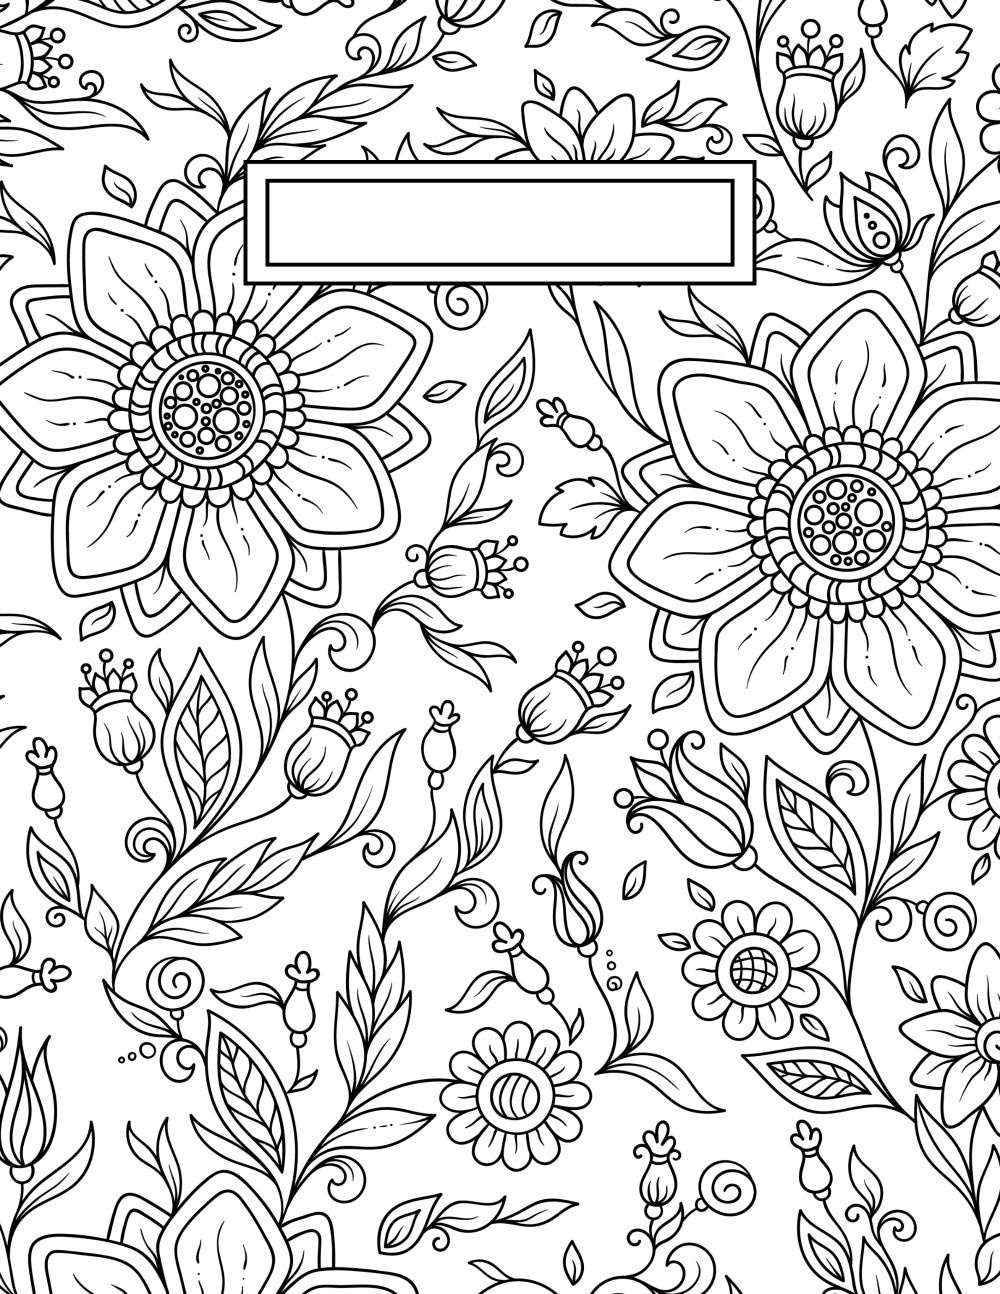 Back To School Binder Cover Adult Coloring Pages | Craft Ideas - Free Printable Binder Covers To Color